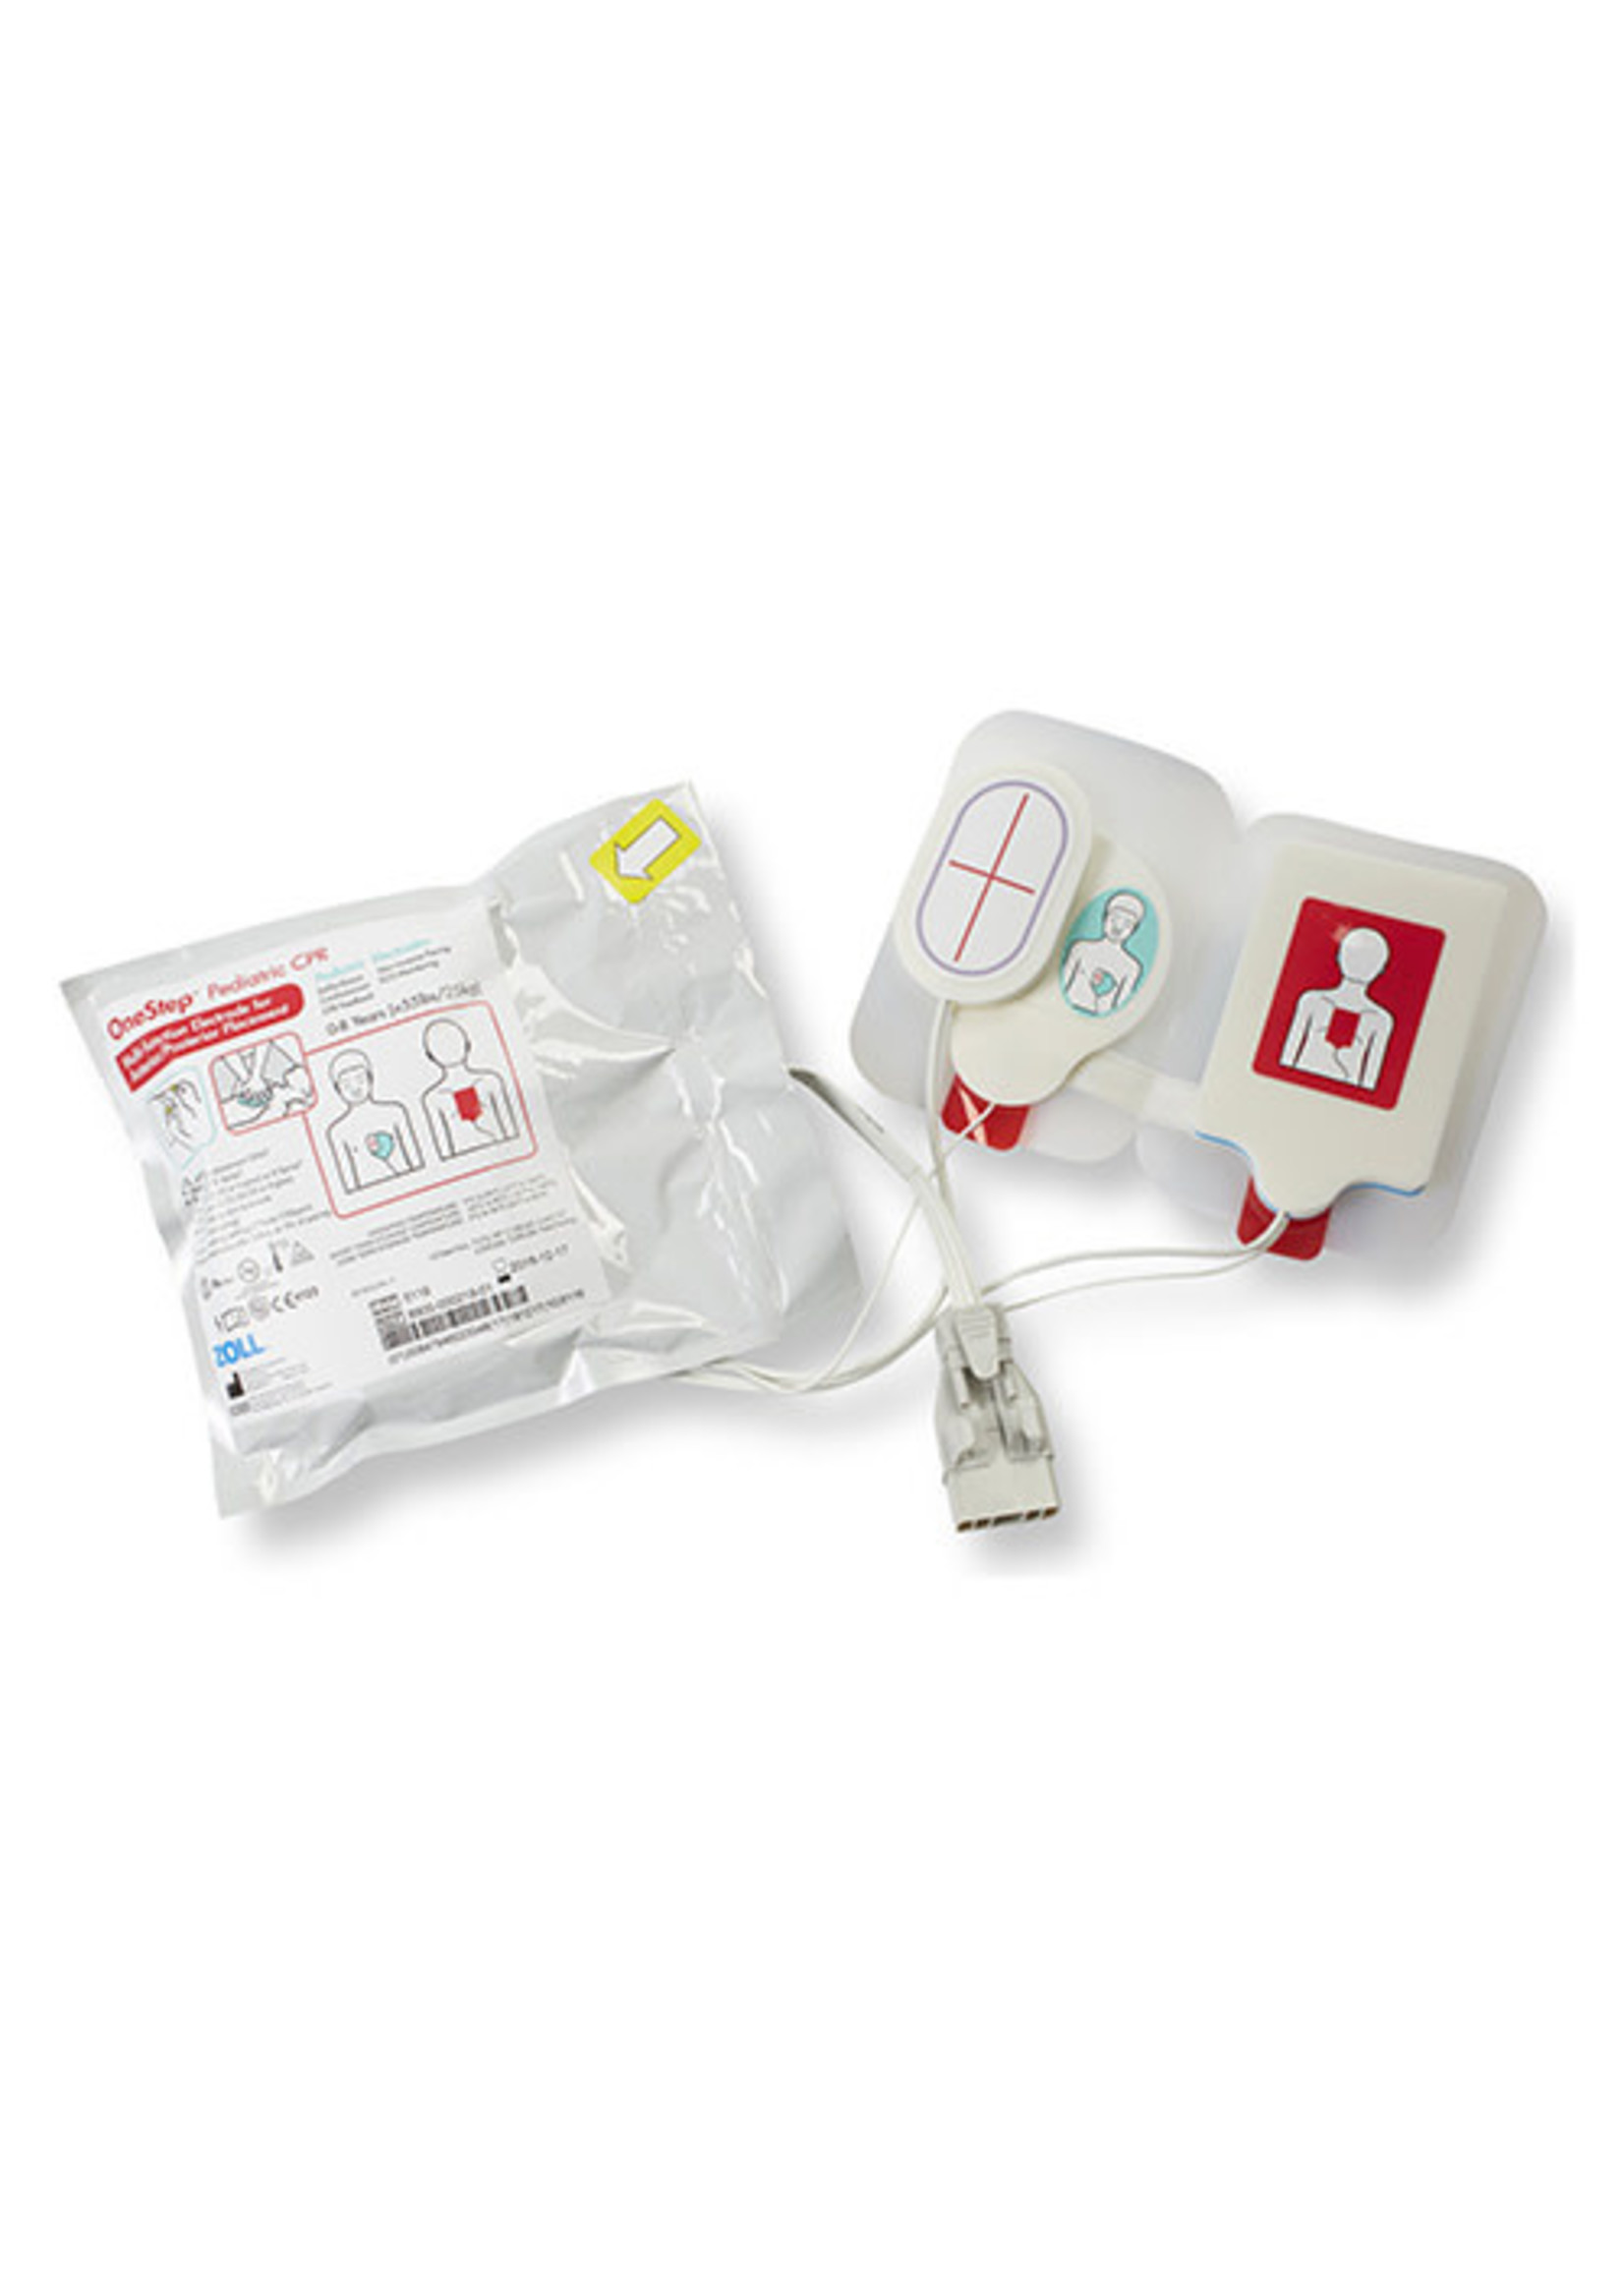 Zoll OneStep Pediatric CPR (Monitor)